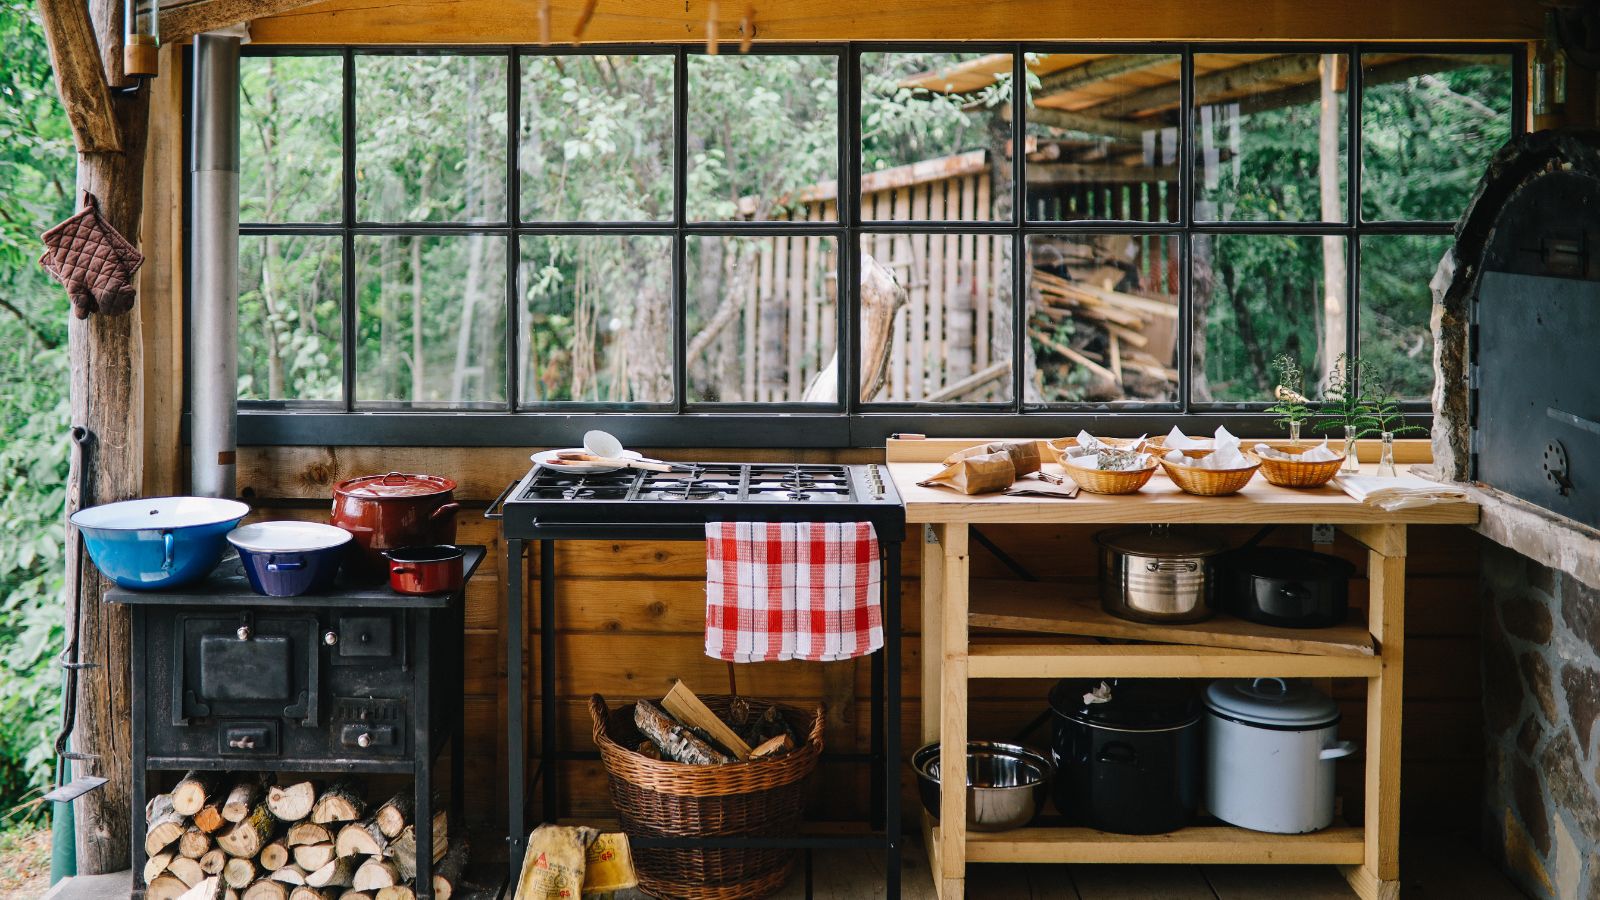 Why Outdoor Kitchens are Taking Over
